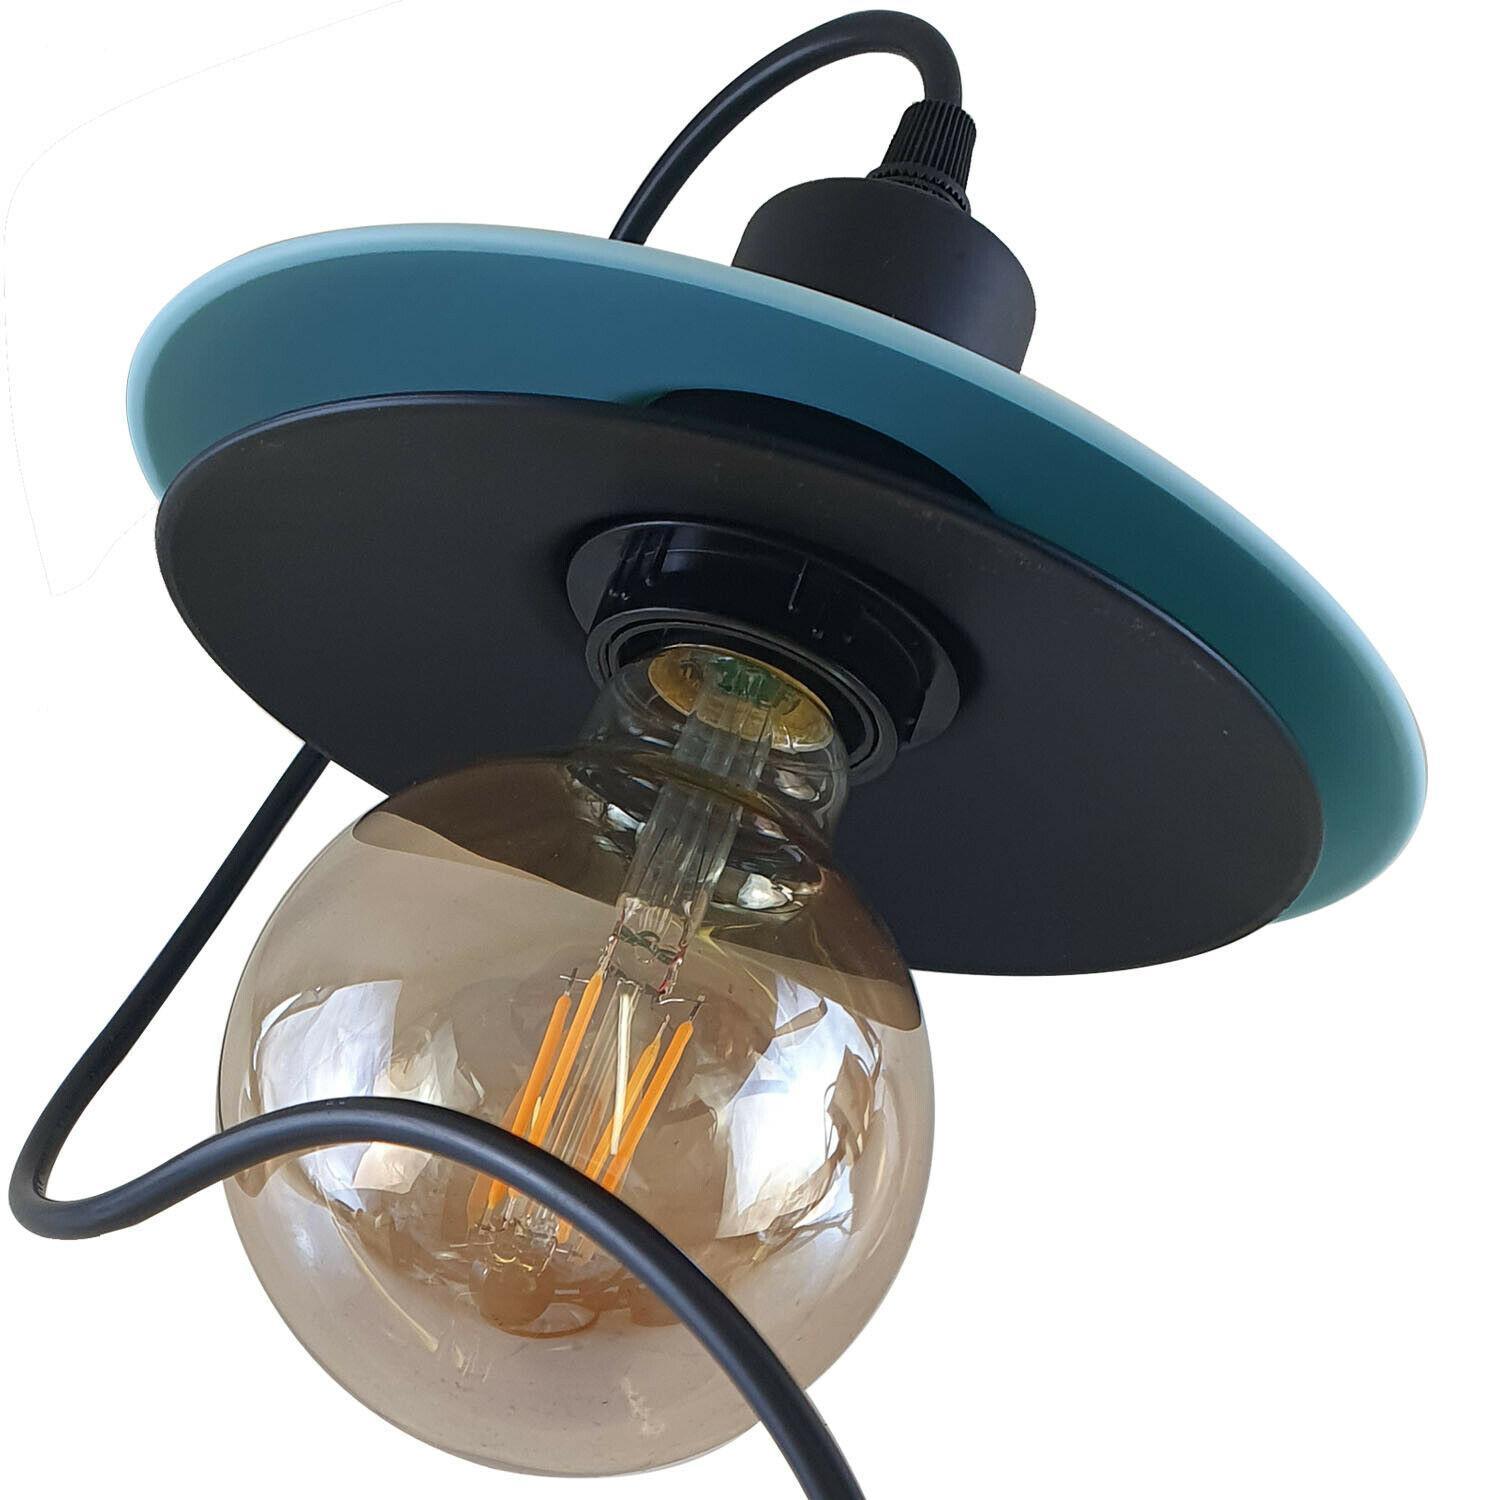 Modern Double shade 2Pack Black And Blue Shade Pendant Light